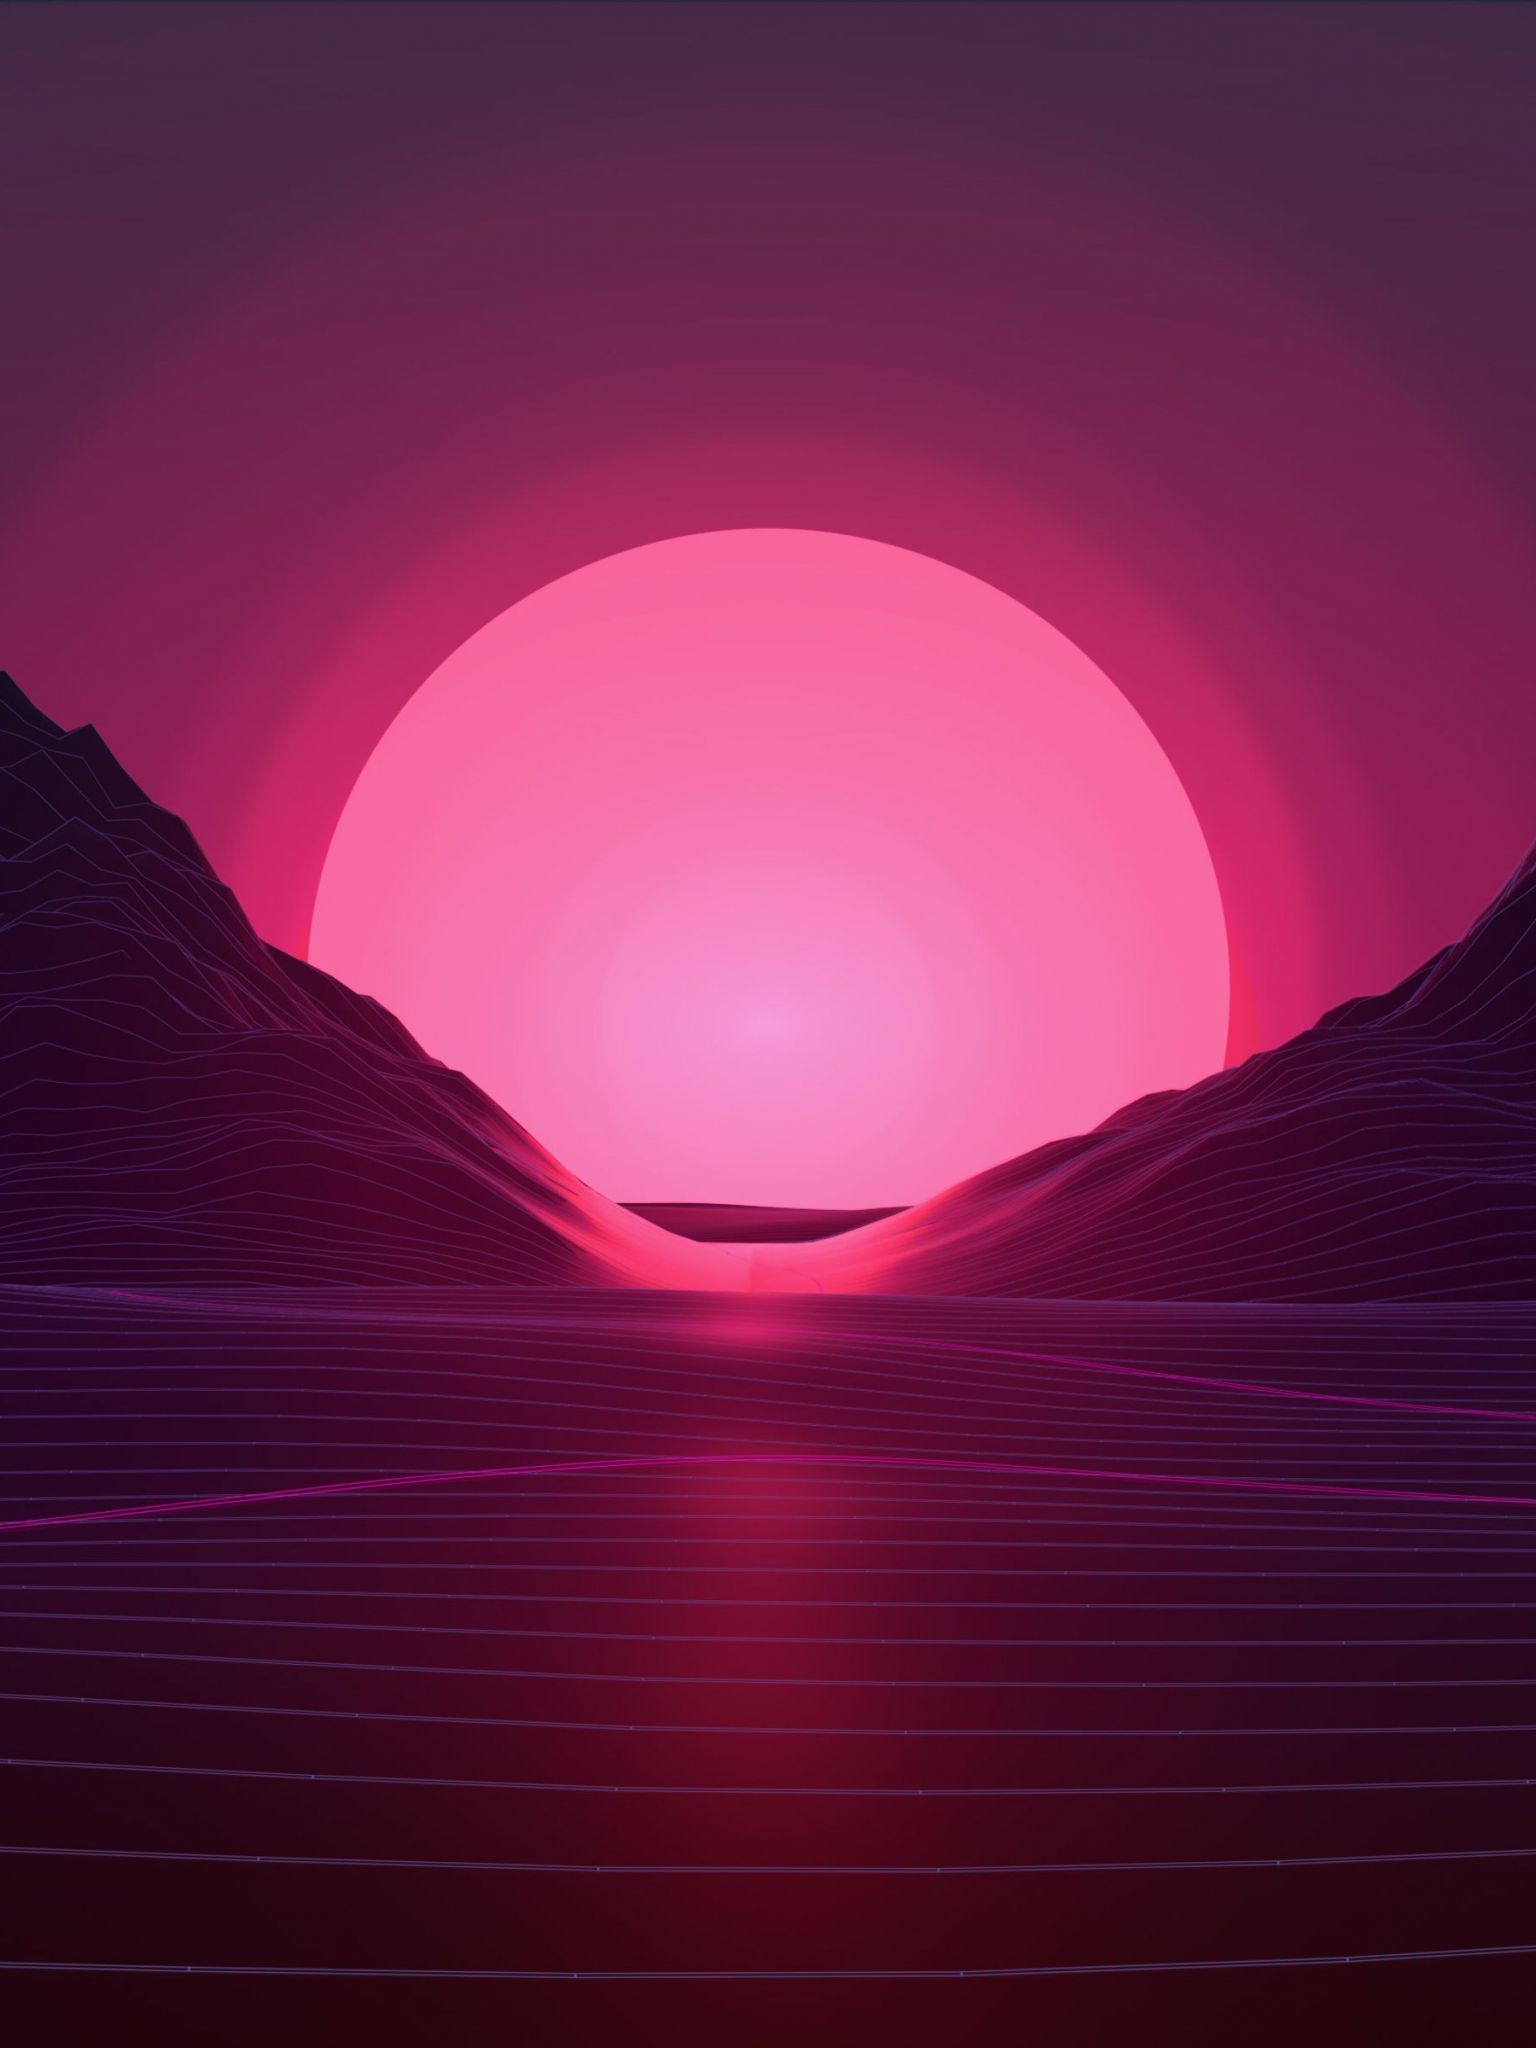 A sunset with mountains in the background - Neon pink